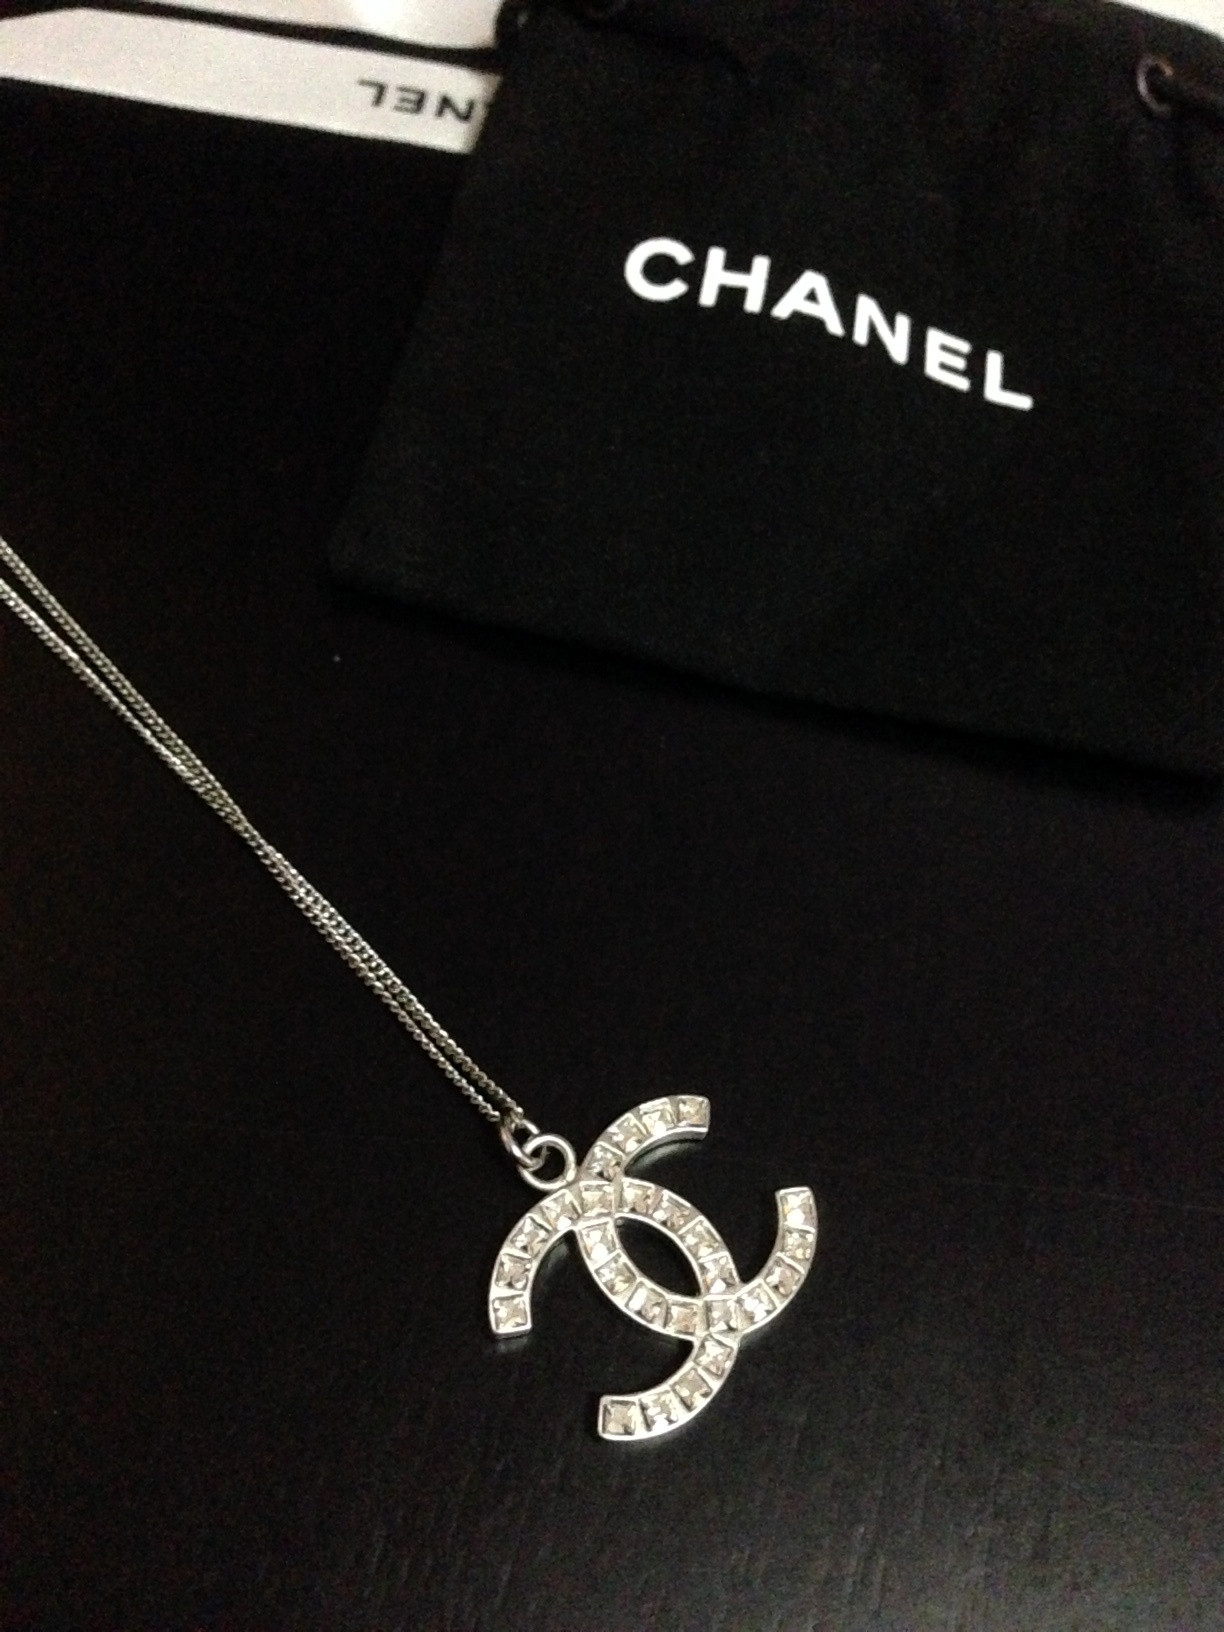 Chanel Necklace Price
 SOLD BRAND NEW Chanel Classic Necklace